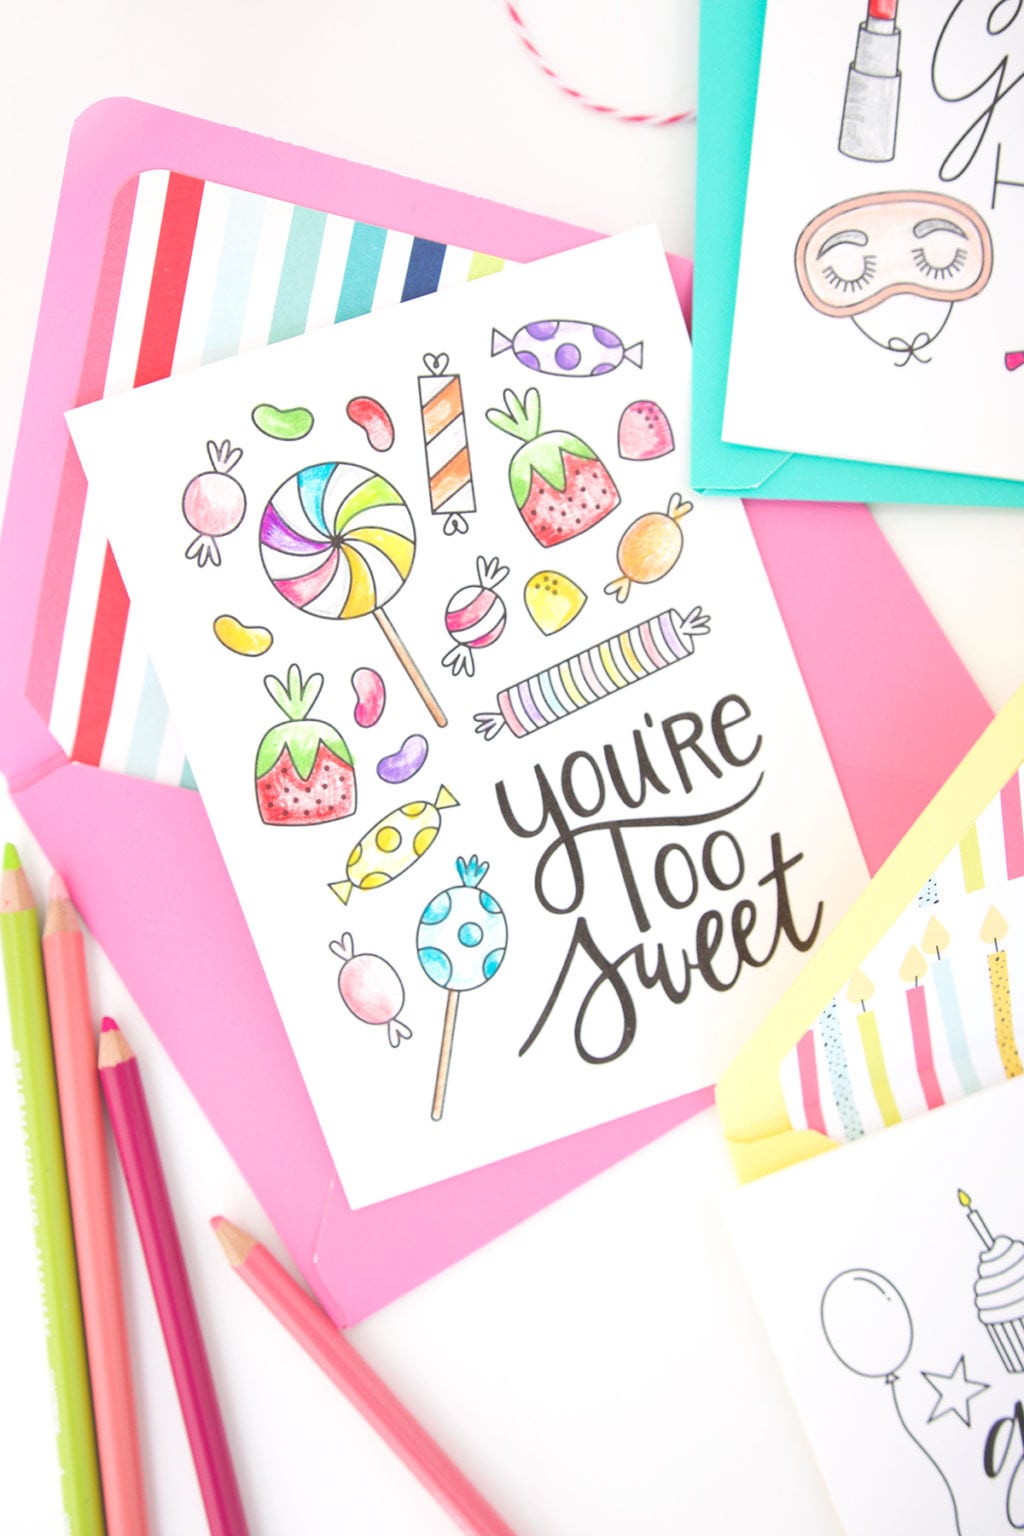 The coloring craze is here to stay. Enjoy coloring in a new way with this printable coloring greeting cards for every occasion